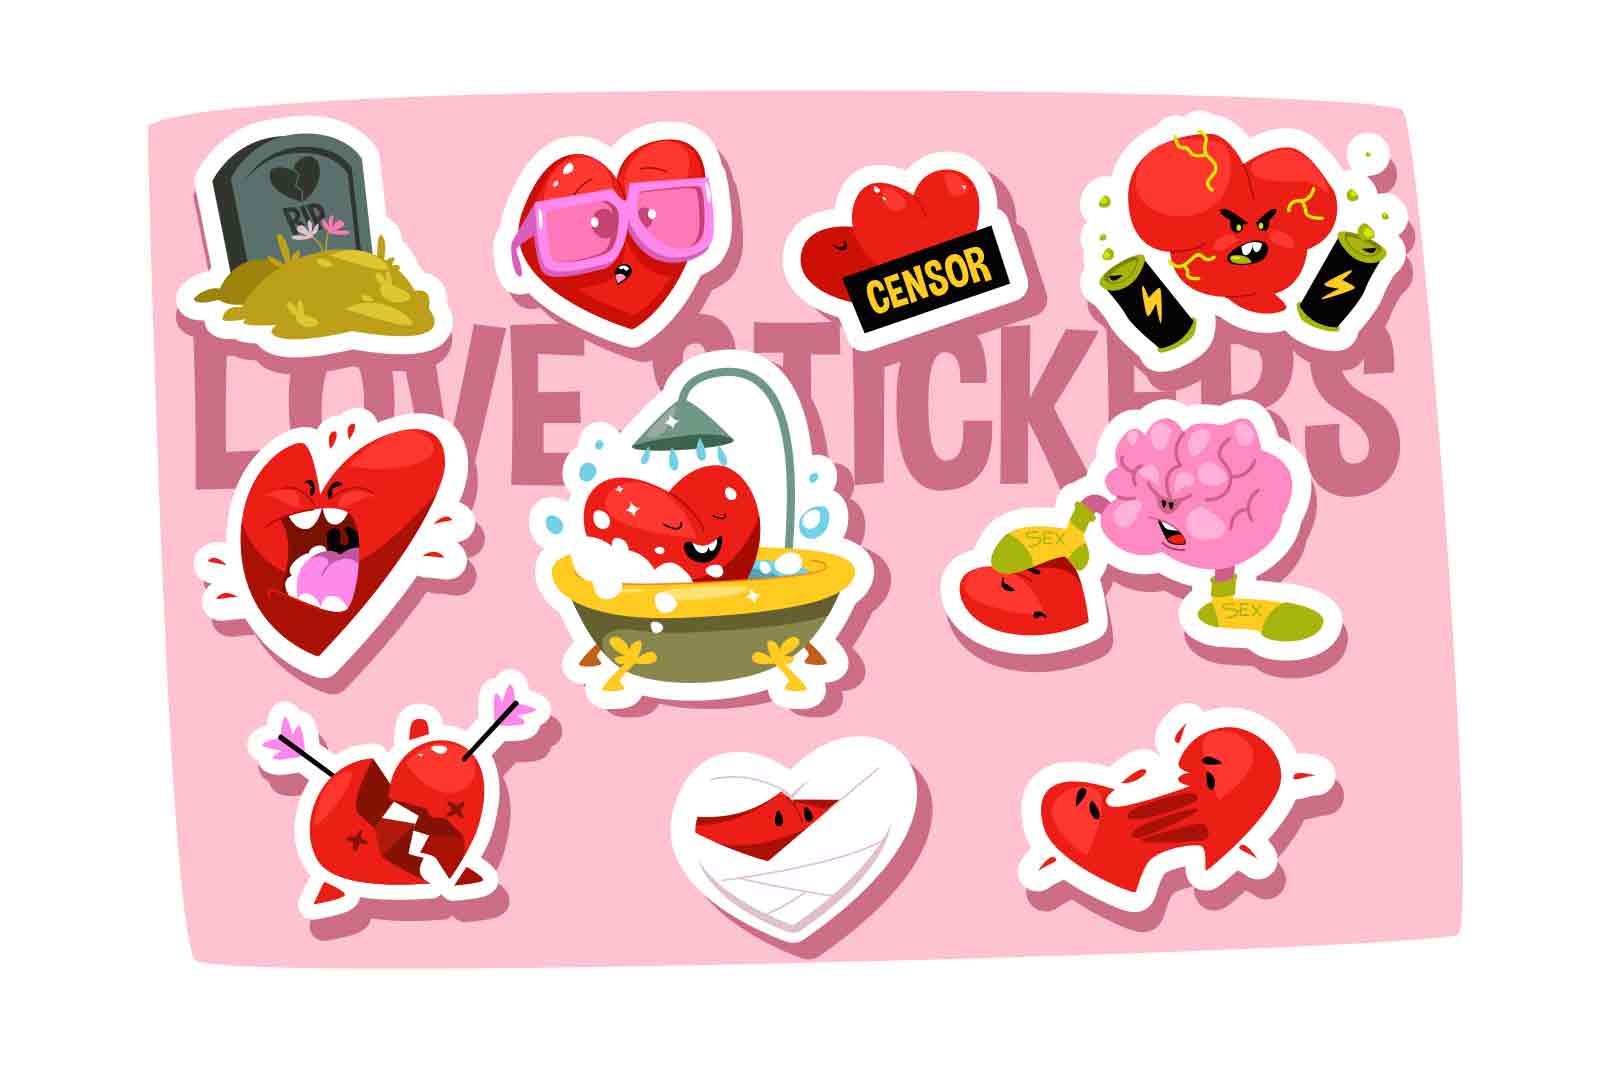 Funny cartoon heart character emotions stickers set vector illustration. Cute heart showing different emotions flat style concept